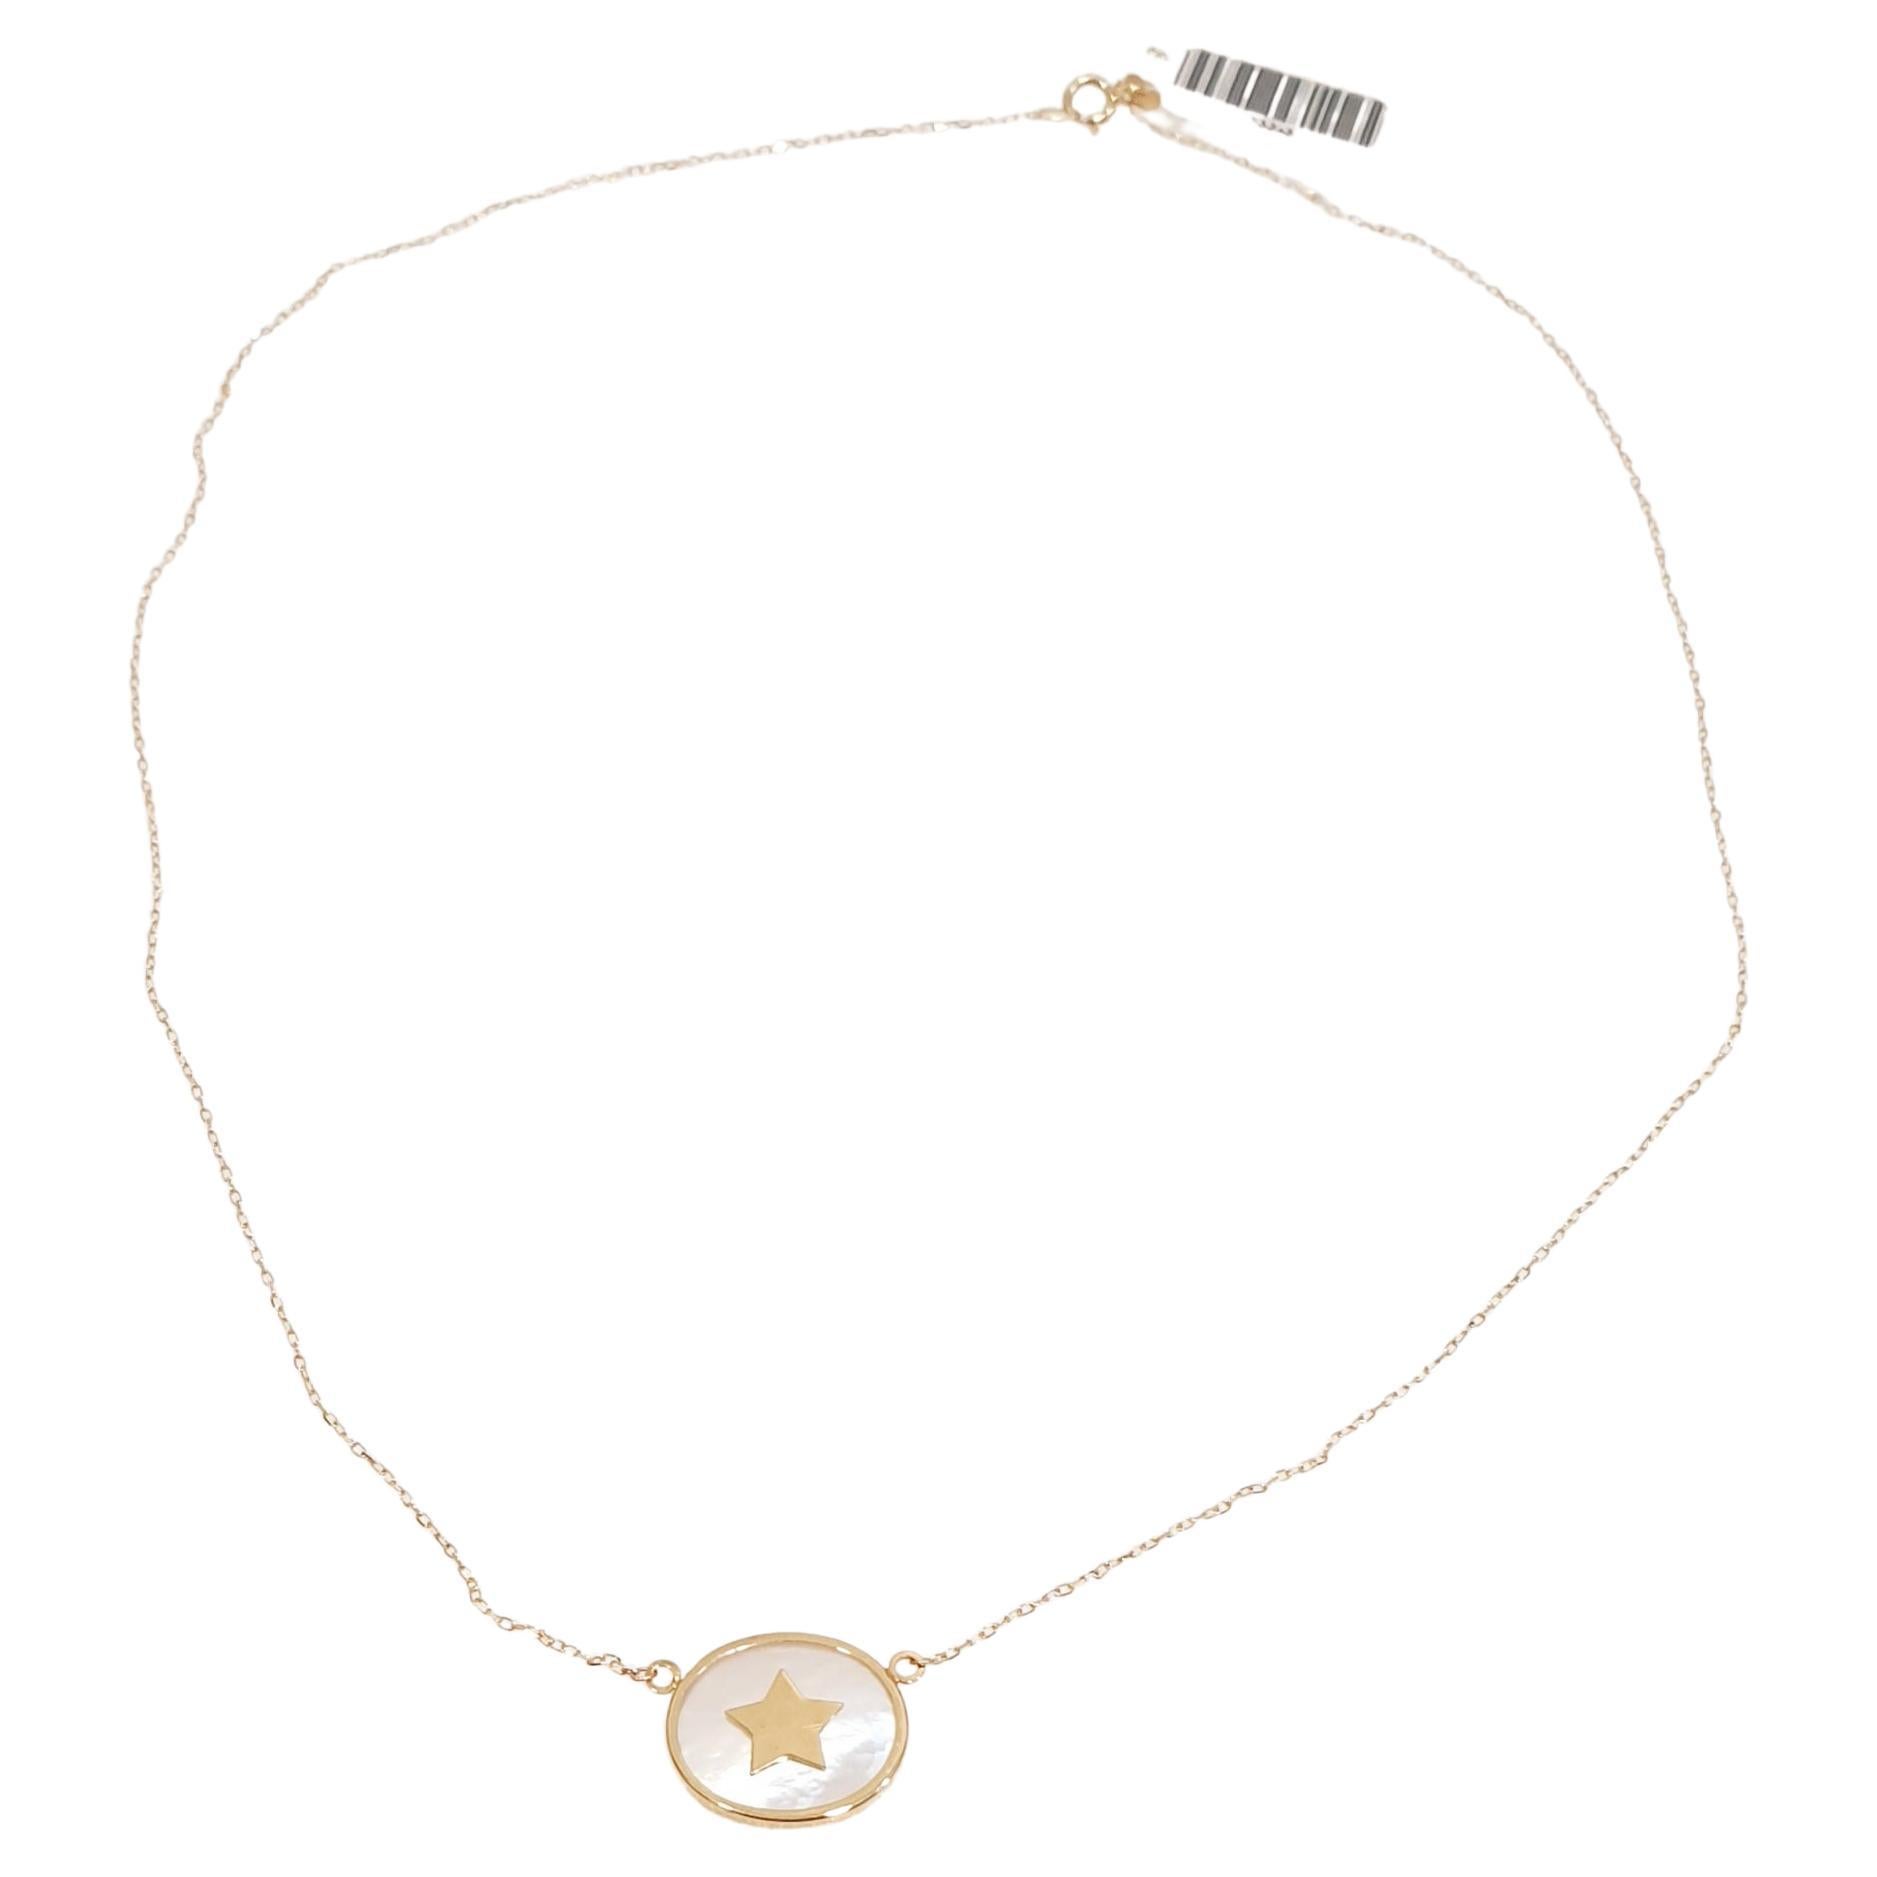 Contemporary 18 Karat Yellow Gold Chain with Star and White Nacre Pendant For Sale